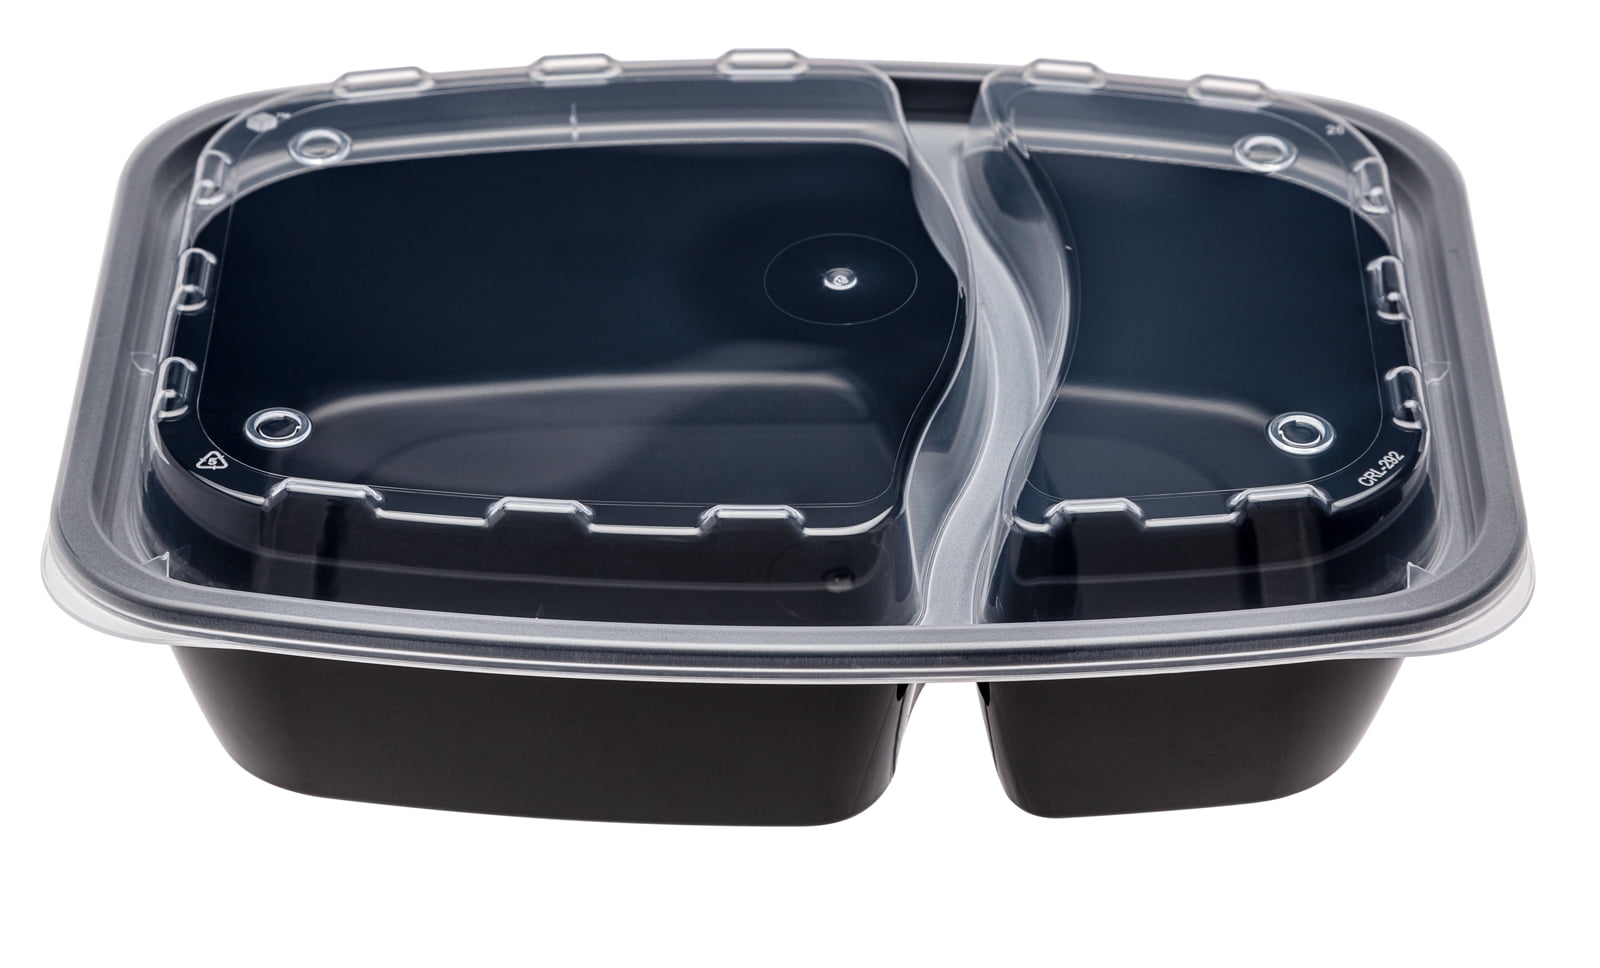 Enpak injection plastic 28 oz microwave container with lid